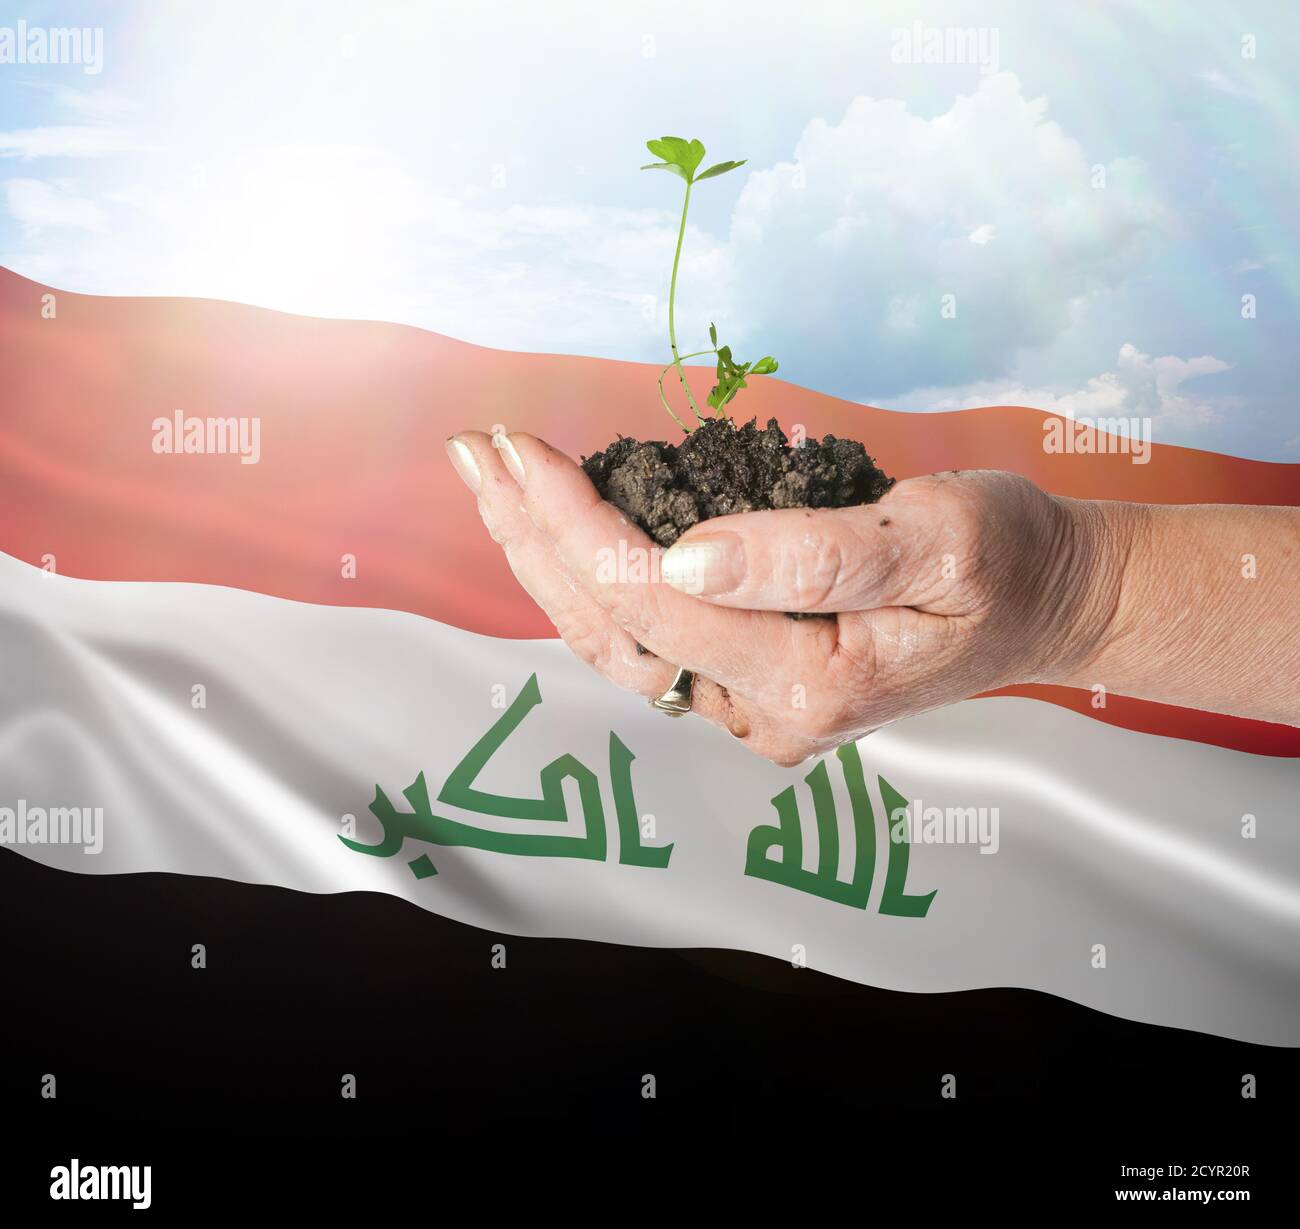 Iraq growth and new beginning. Green renewable energy and ecology concept. Hand holding young plant. Stock Photo